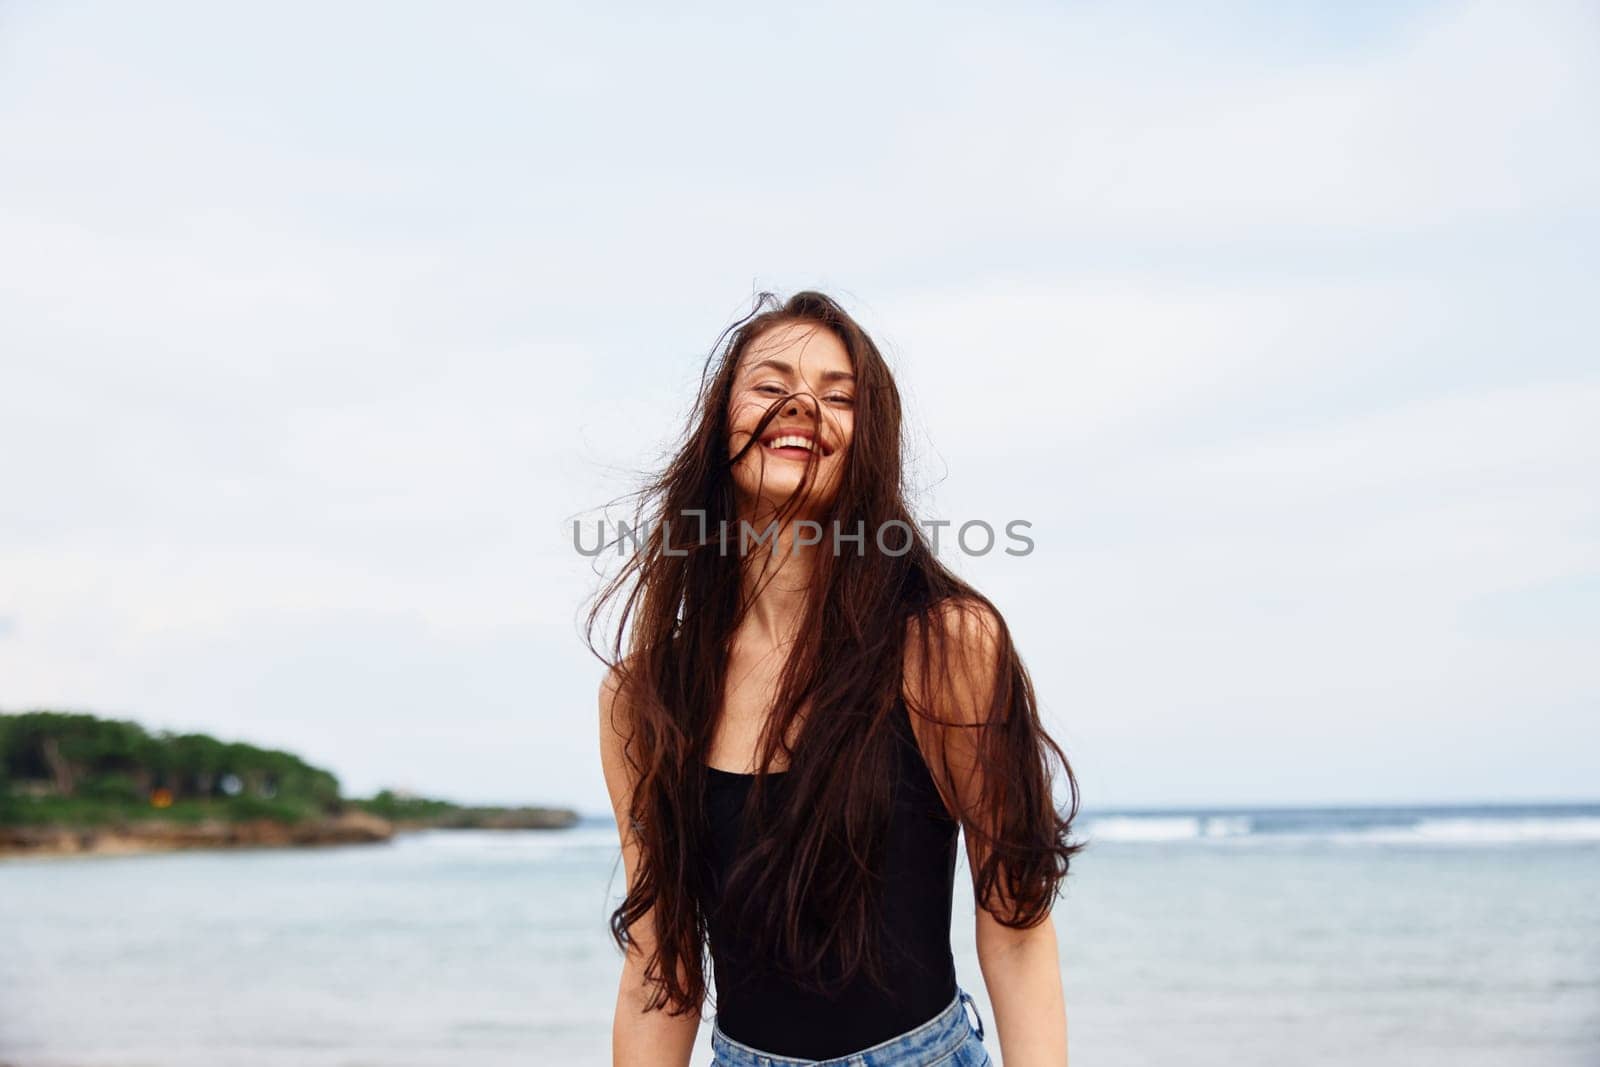 woman beauty happiness summer leisure positive flight smile sea smiling beach running travel young beautiful fun lifestyle carefree activity sunset girl